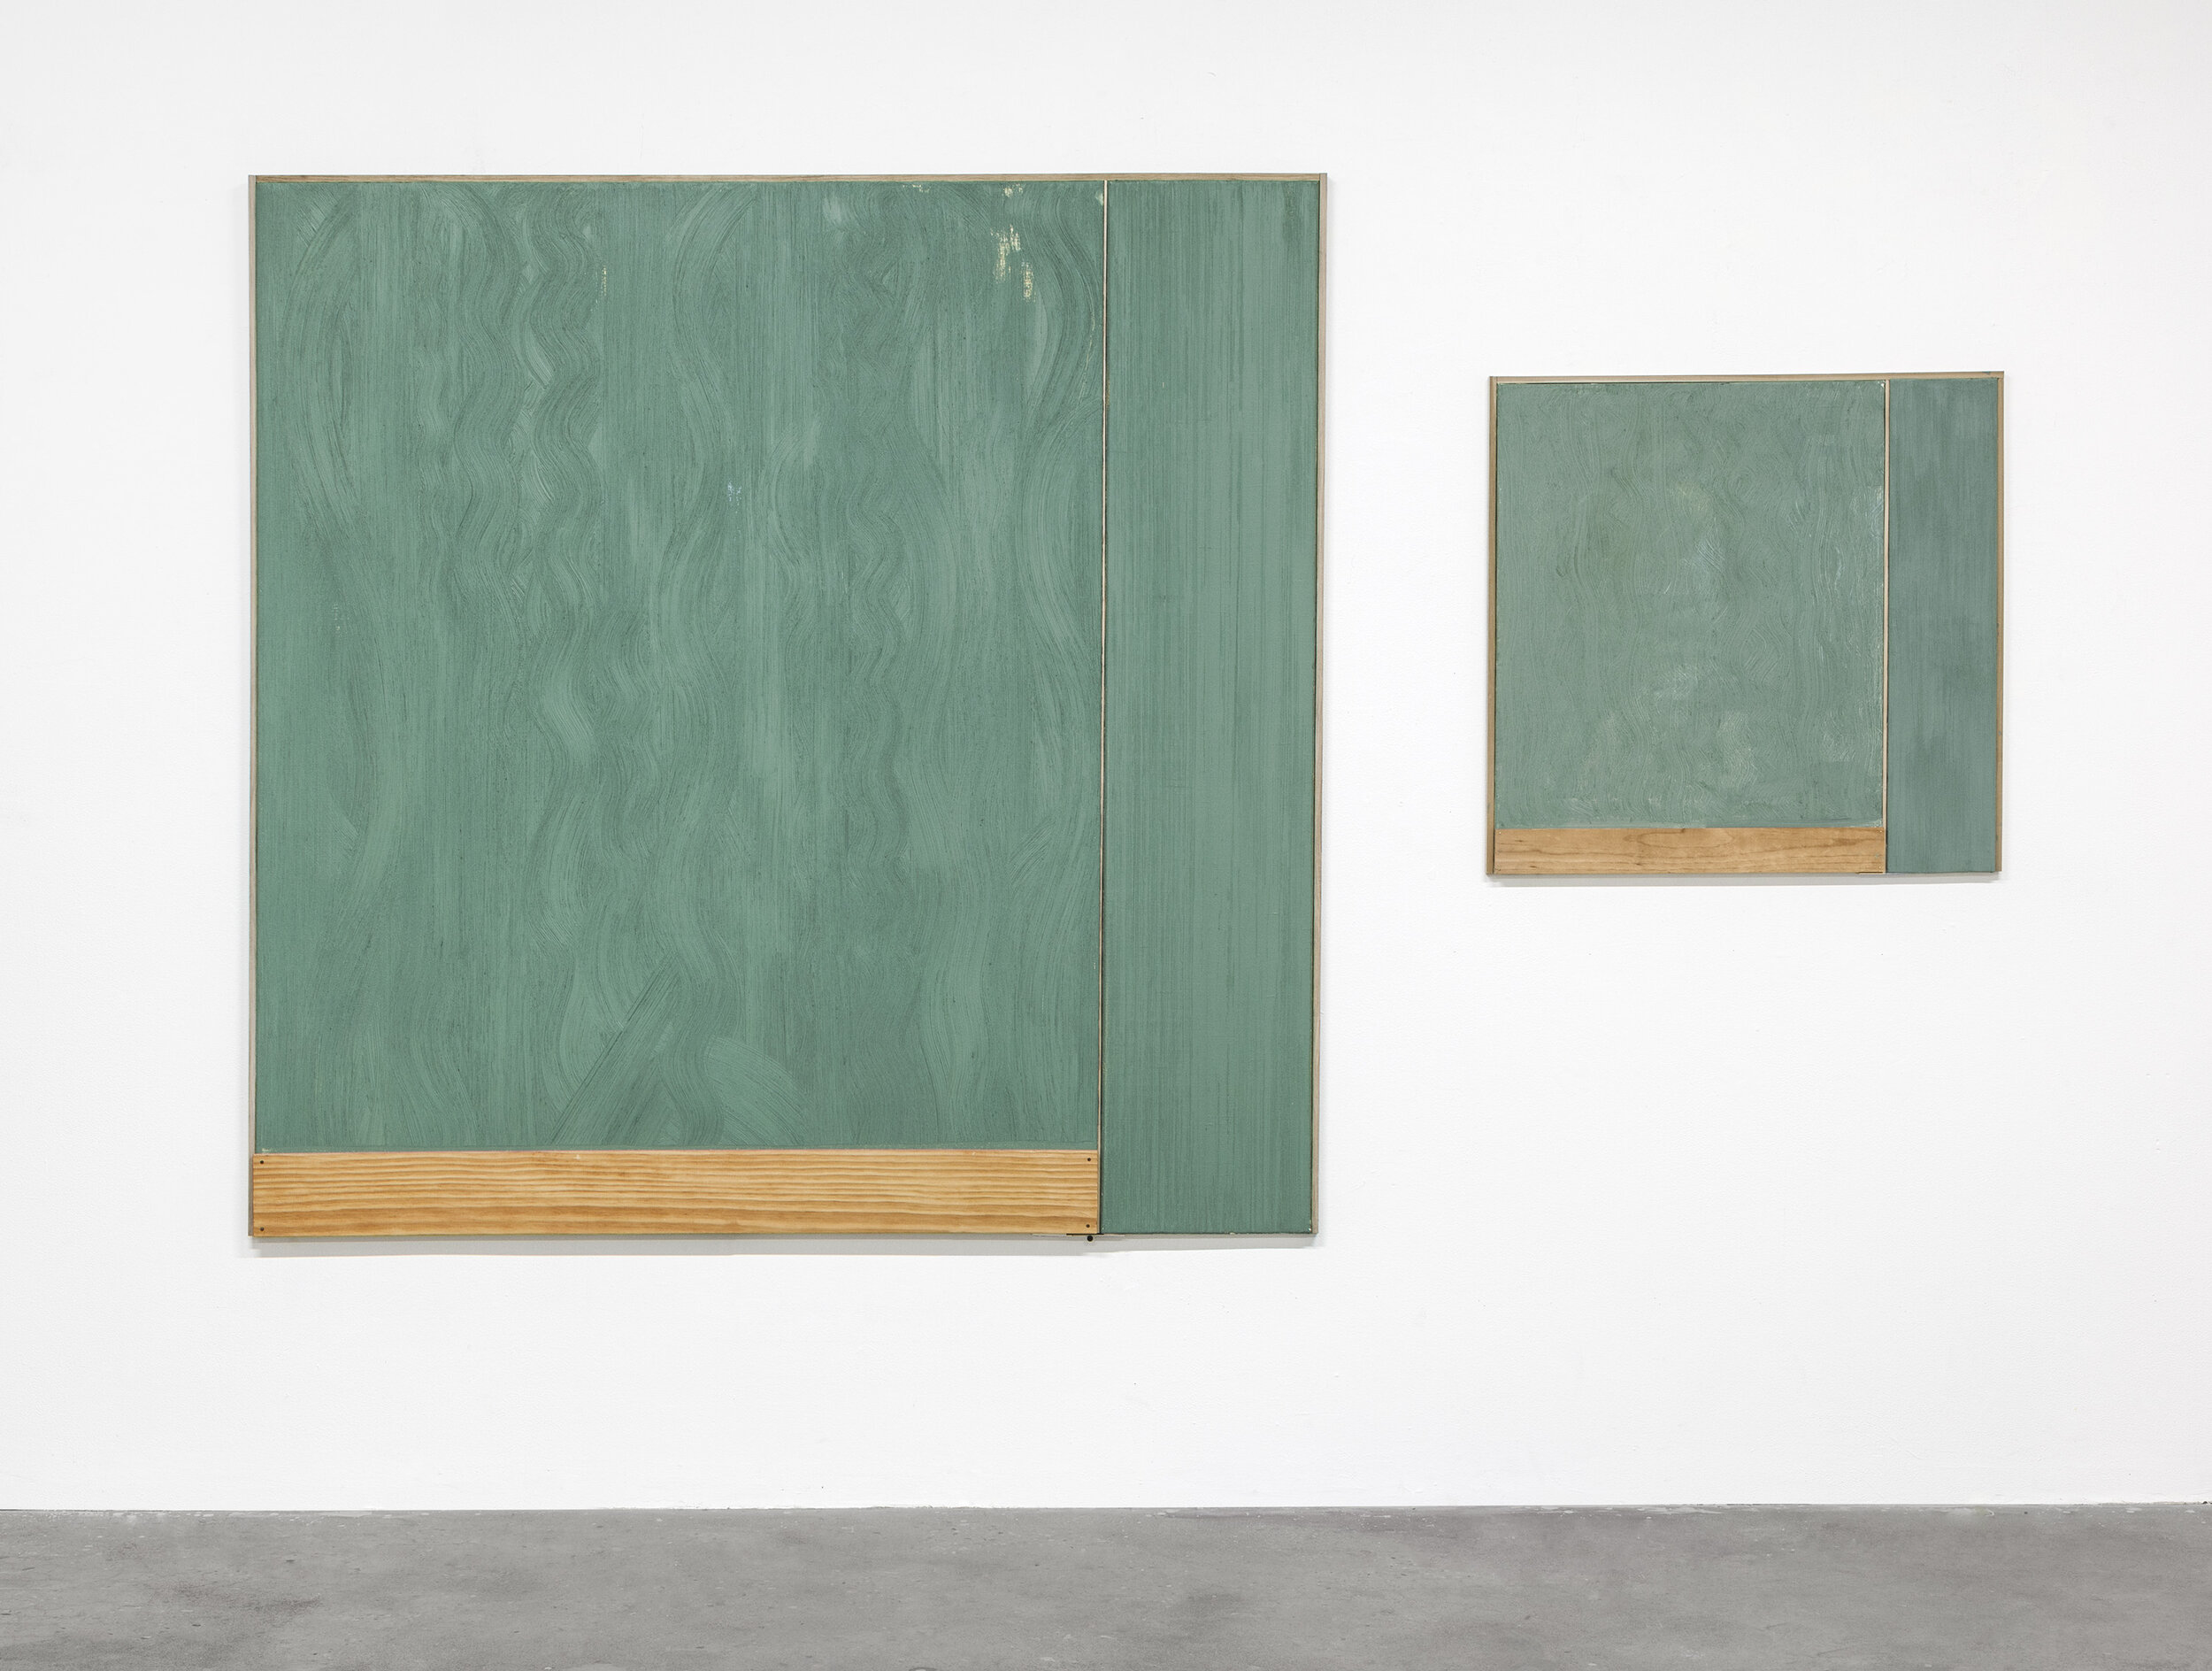    Roman à Clef and Clef (Green Shade) , 2018   Oil and wax on canvas with pine and copper  61 x 61 inches  28.5 x 29 inches   